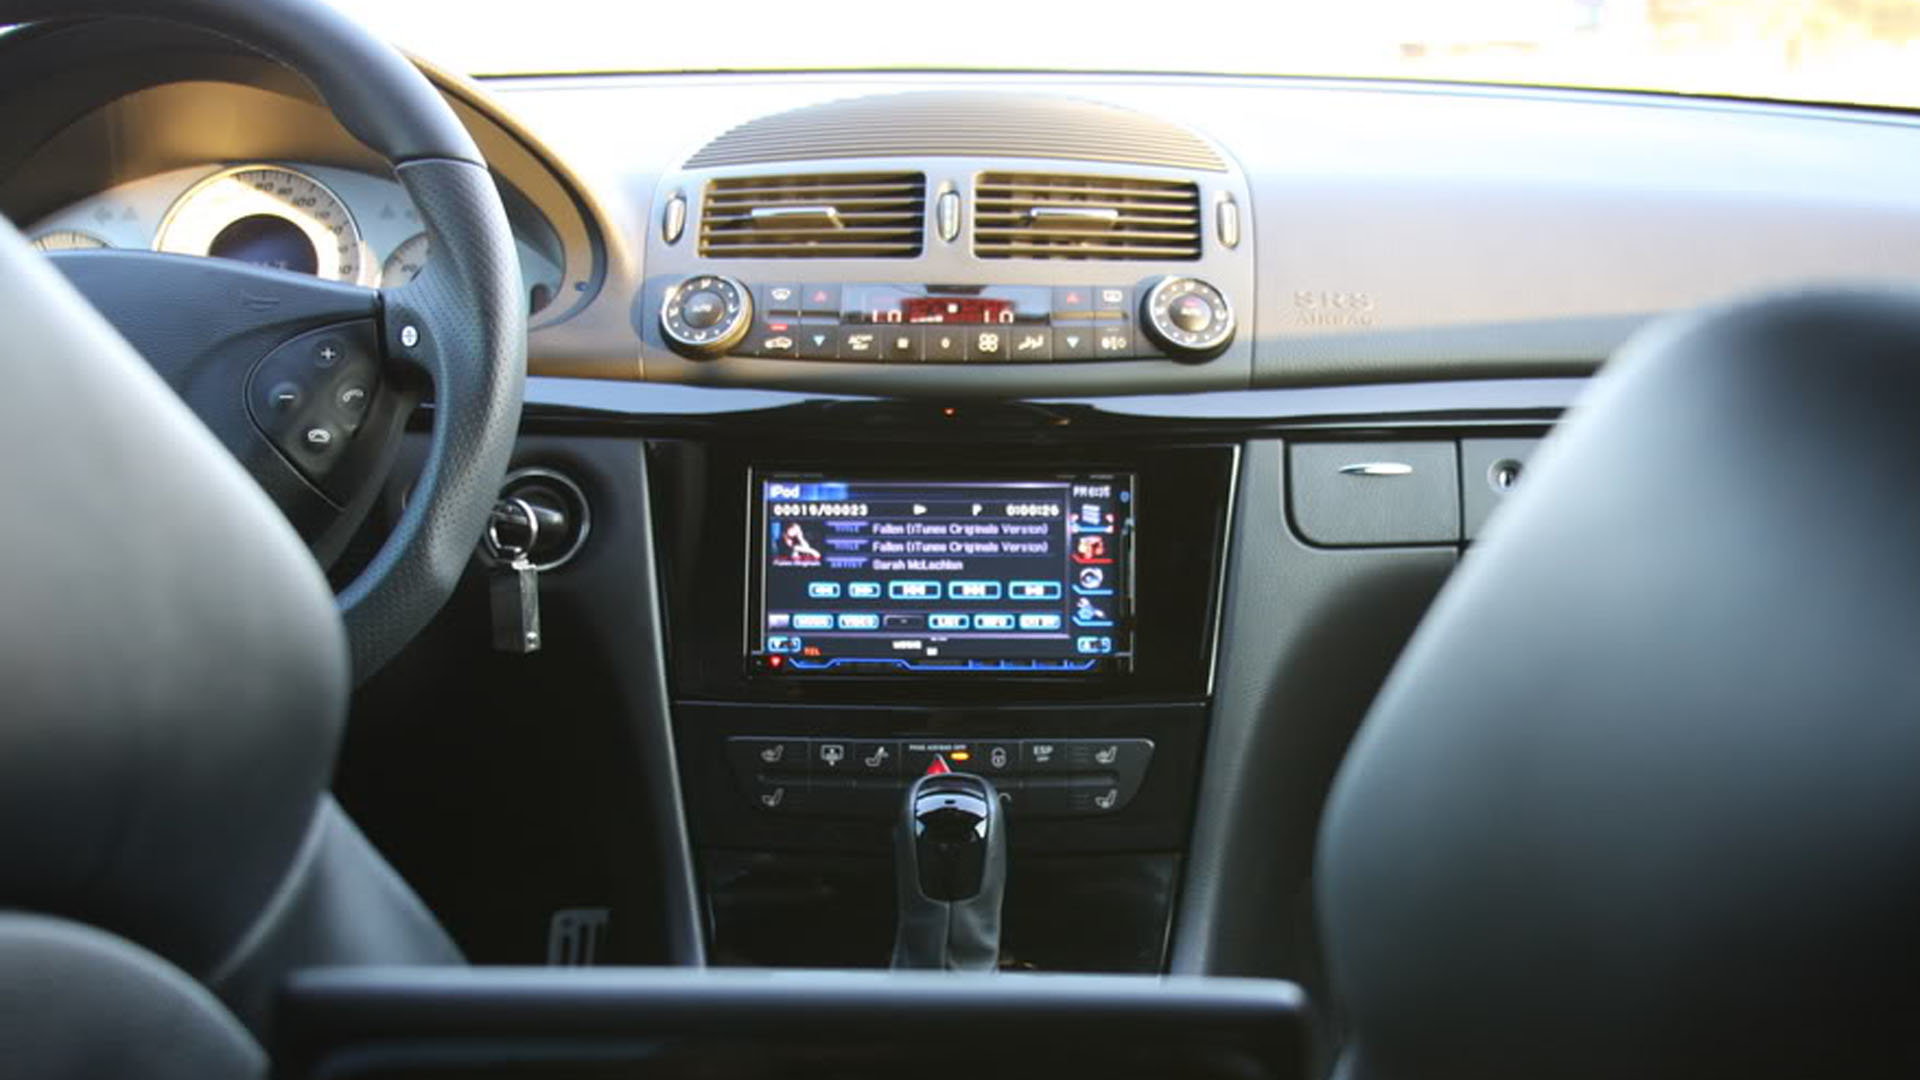 Mercedes-Benz E-Class and E-Class AMG: How to Install Car Stereo | Mbworld